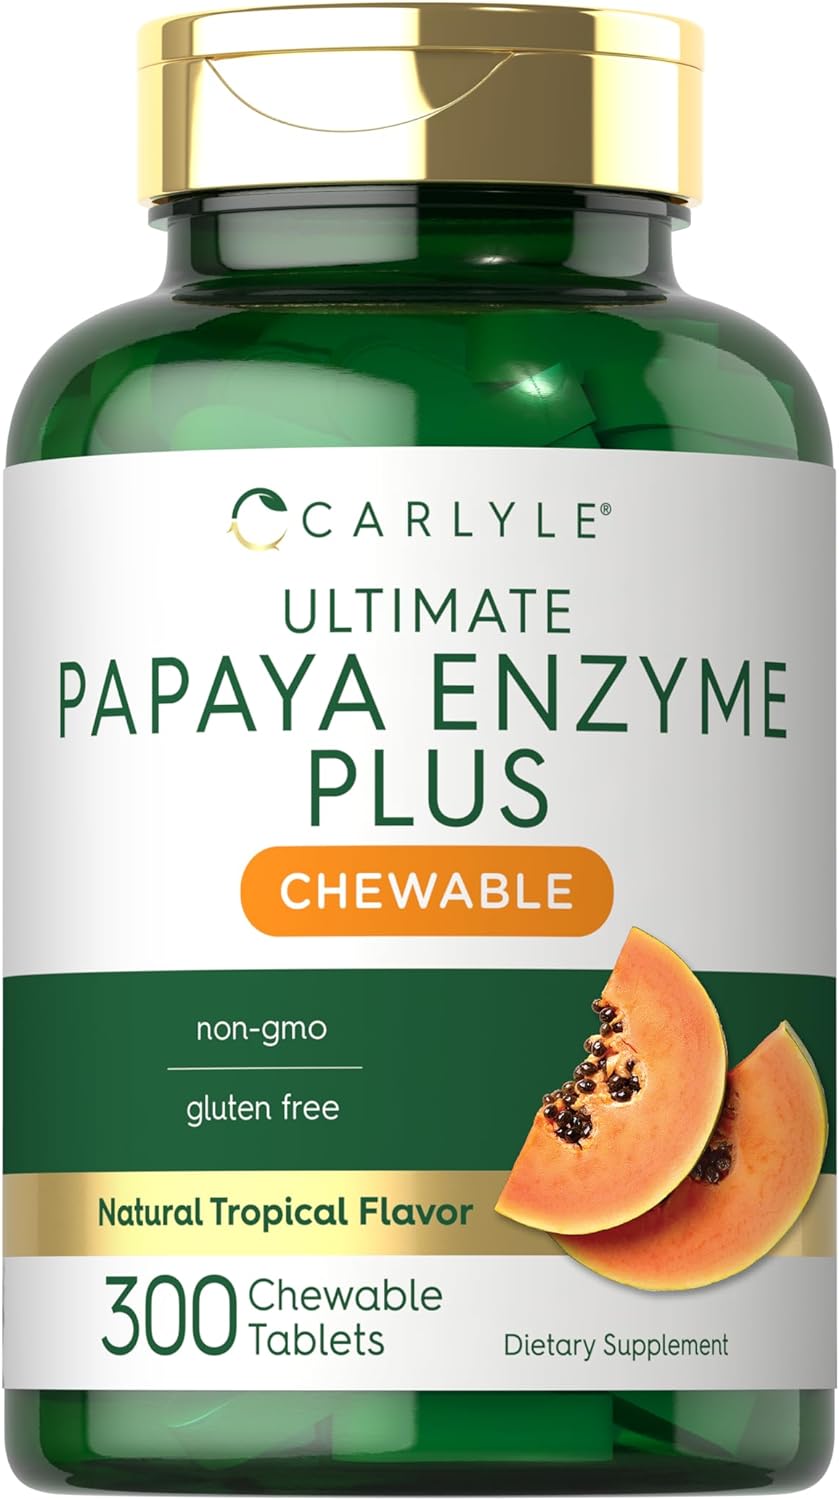 Carlyle Papaya Enzyme Chewable Tablets | Vegetarian, Non-GMO, Gluten Free Formula | Tropical Flavor